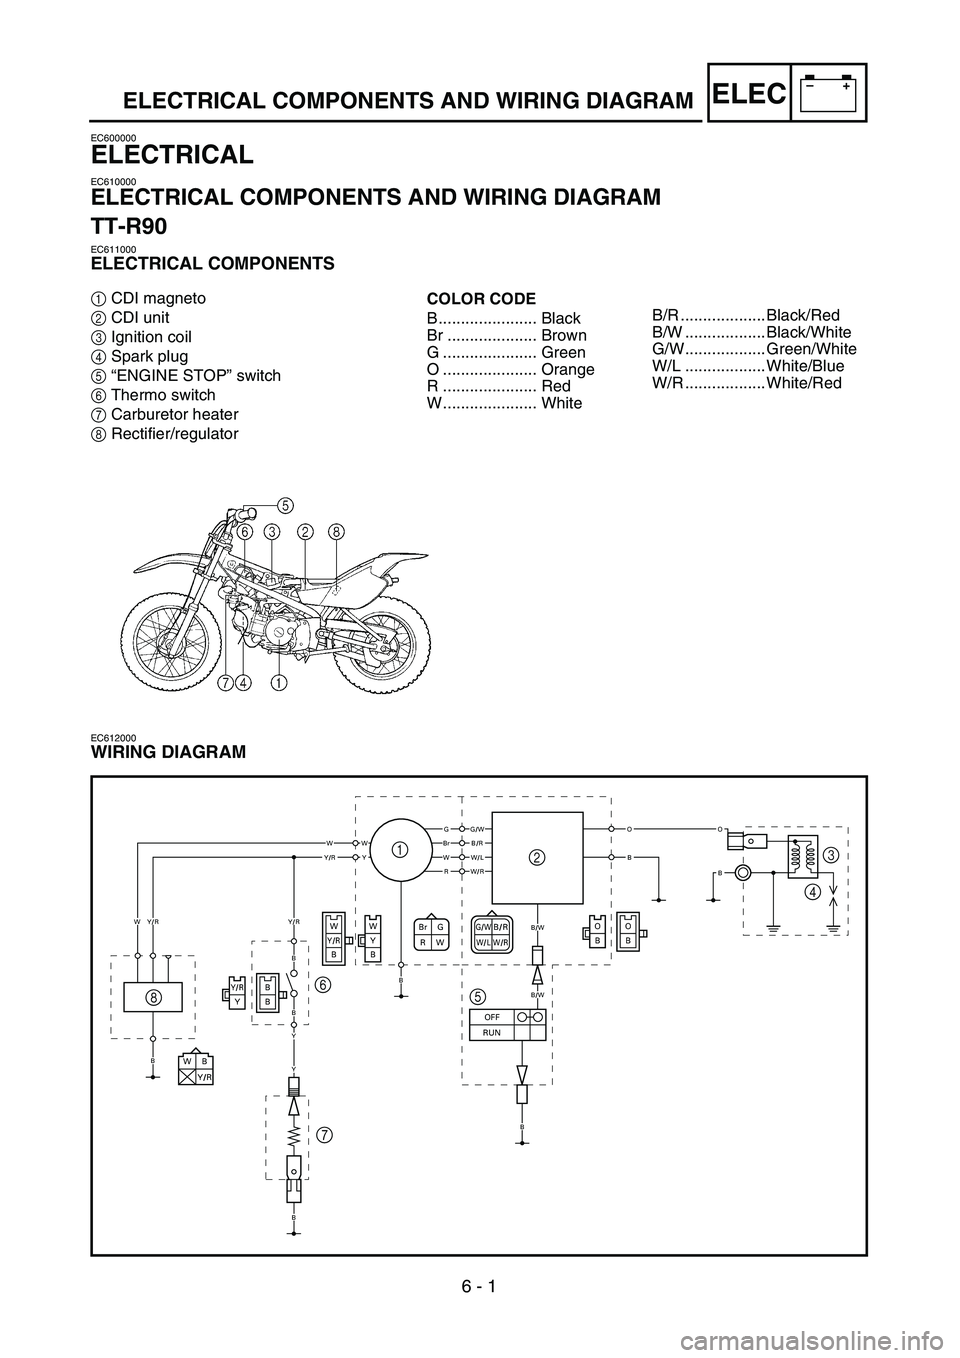 YAMAHA TTR90 2005  Owners Manual 6 - 1
–+ELECELECTRICAL COMPONENTS AND WIRING DIAGRAM
EC600000
ELECTRICAL
EC610000
ELECTRICAL COMPONENTS AND WIRING DIAGRAM
TT-R90
EC611000
ELECTRICAL COMPONENTS
1CDI magneto
2CDI unit
3Ignition coil